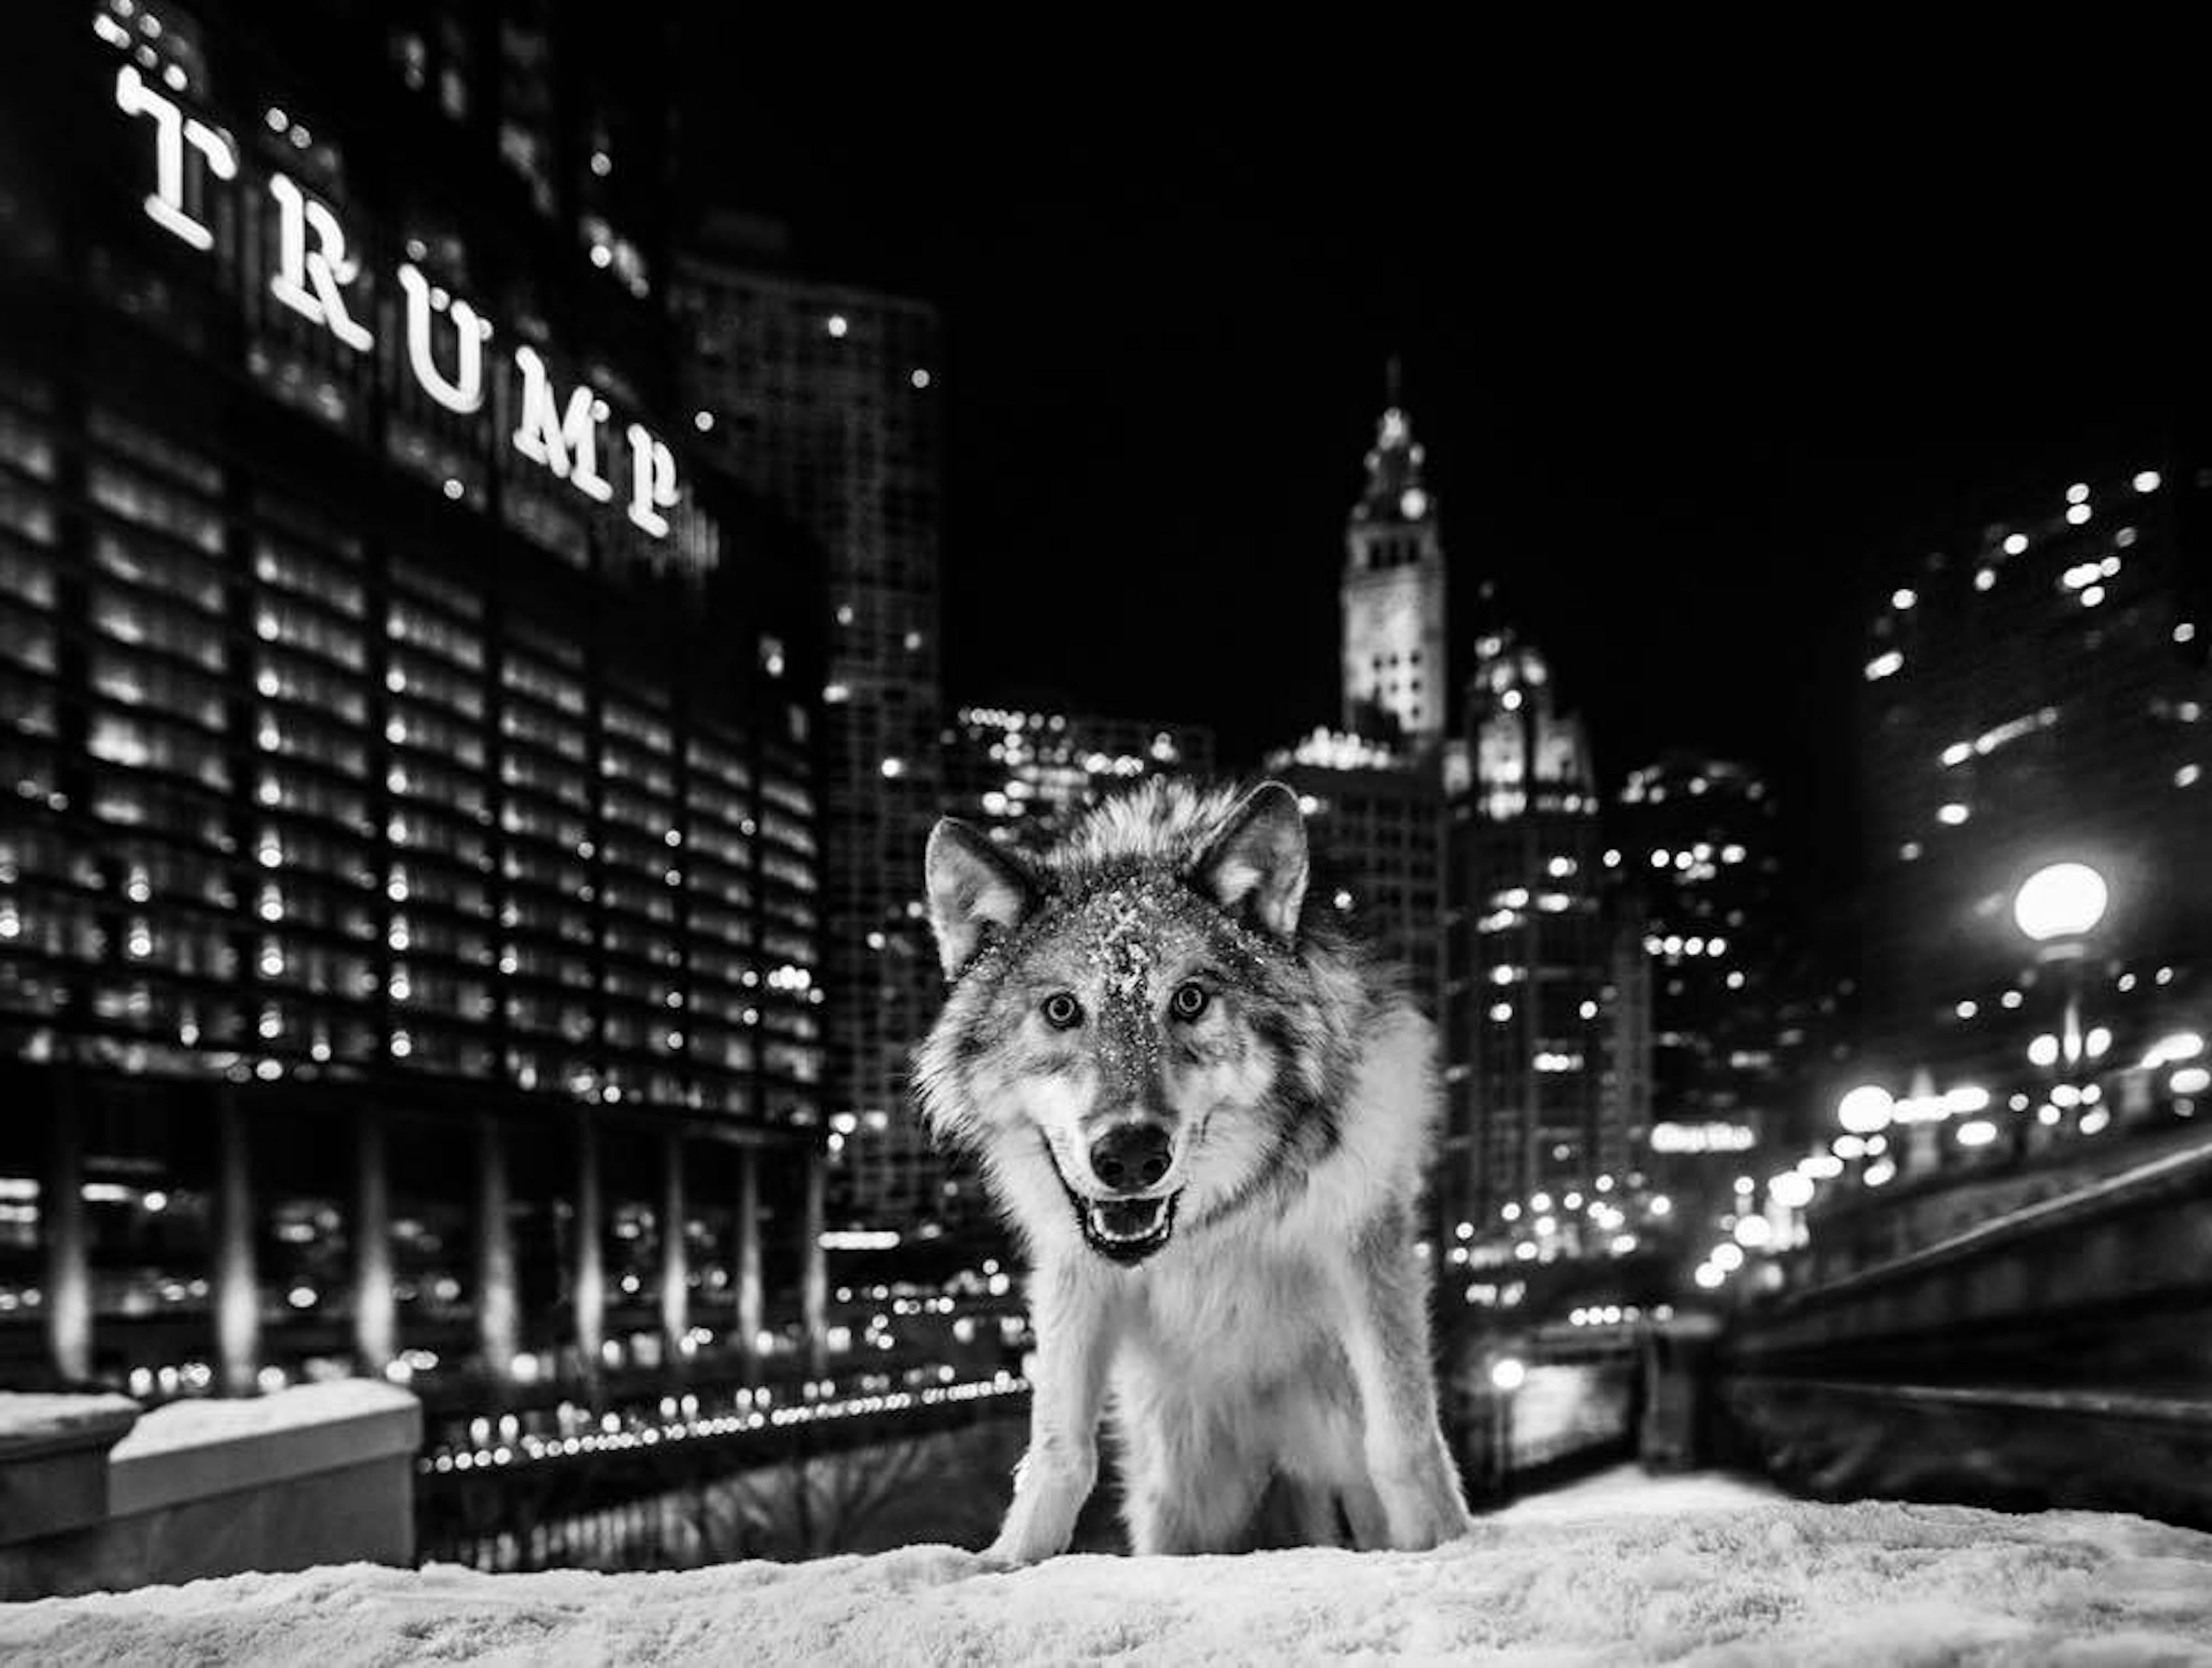 David Yarrow Black and White Photograph - It Is Only a Matter of Time